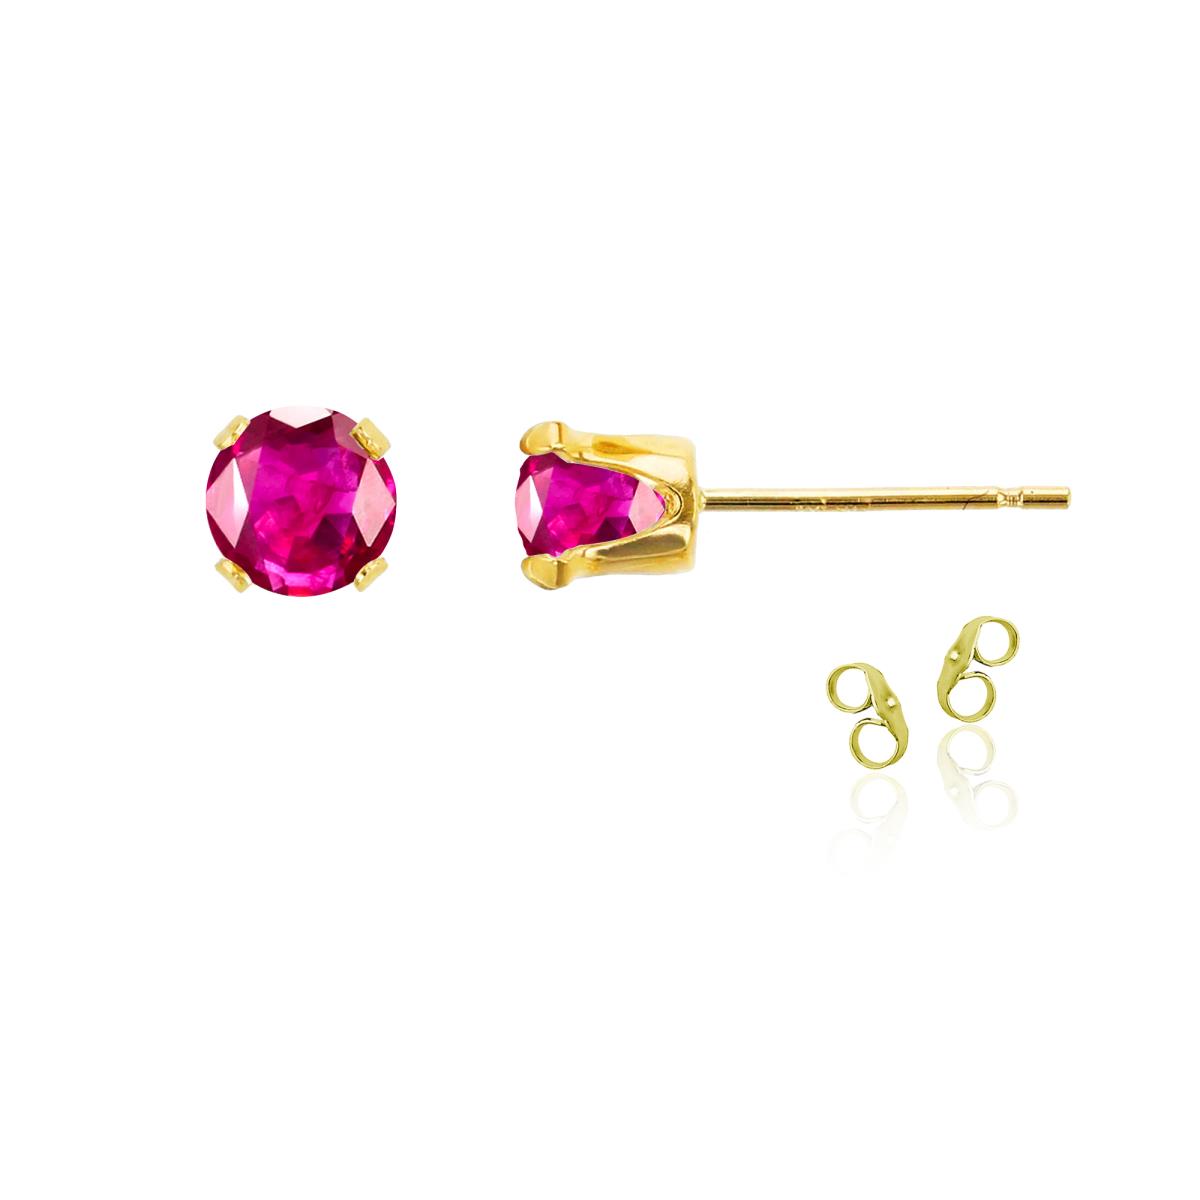 Sterling Silver Yellow 7mm Round Glass Filled Ruby Stud Earring with Clutch